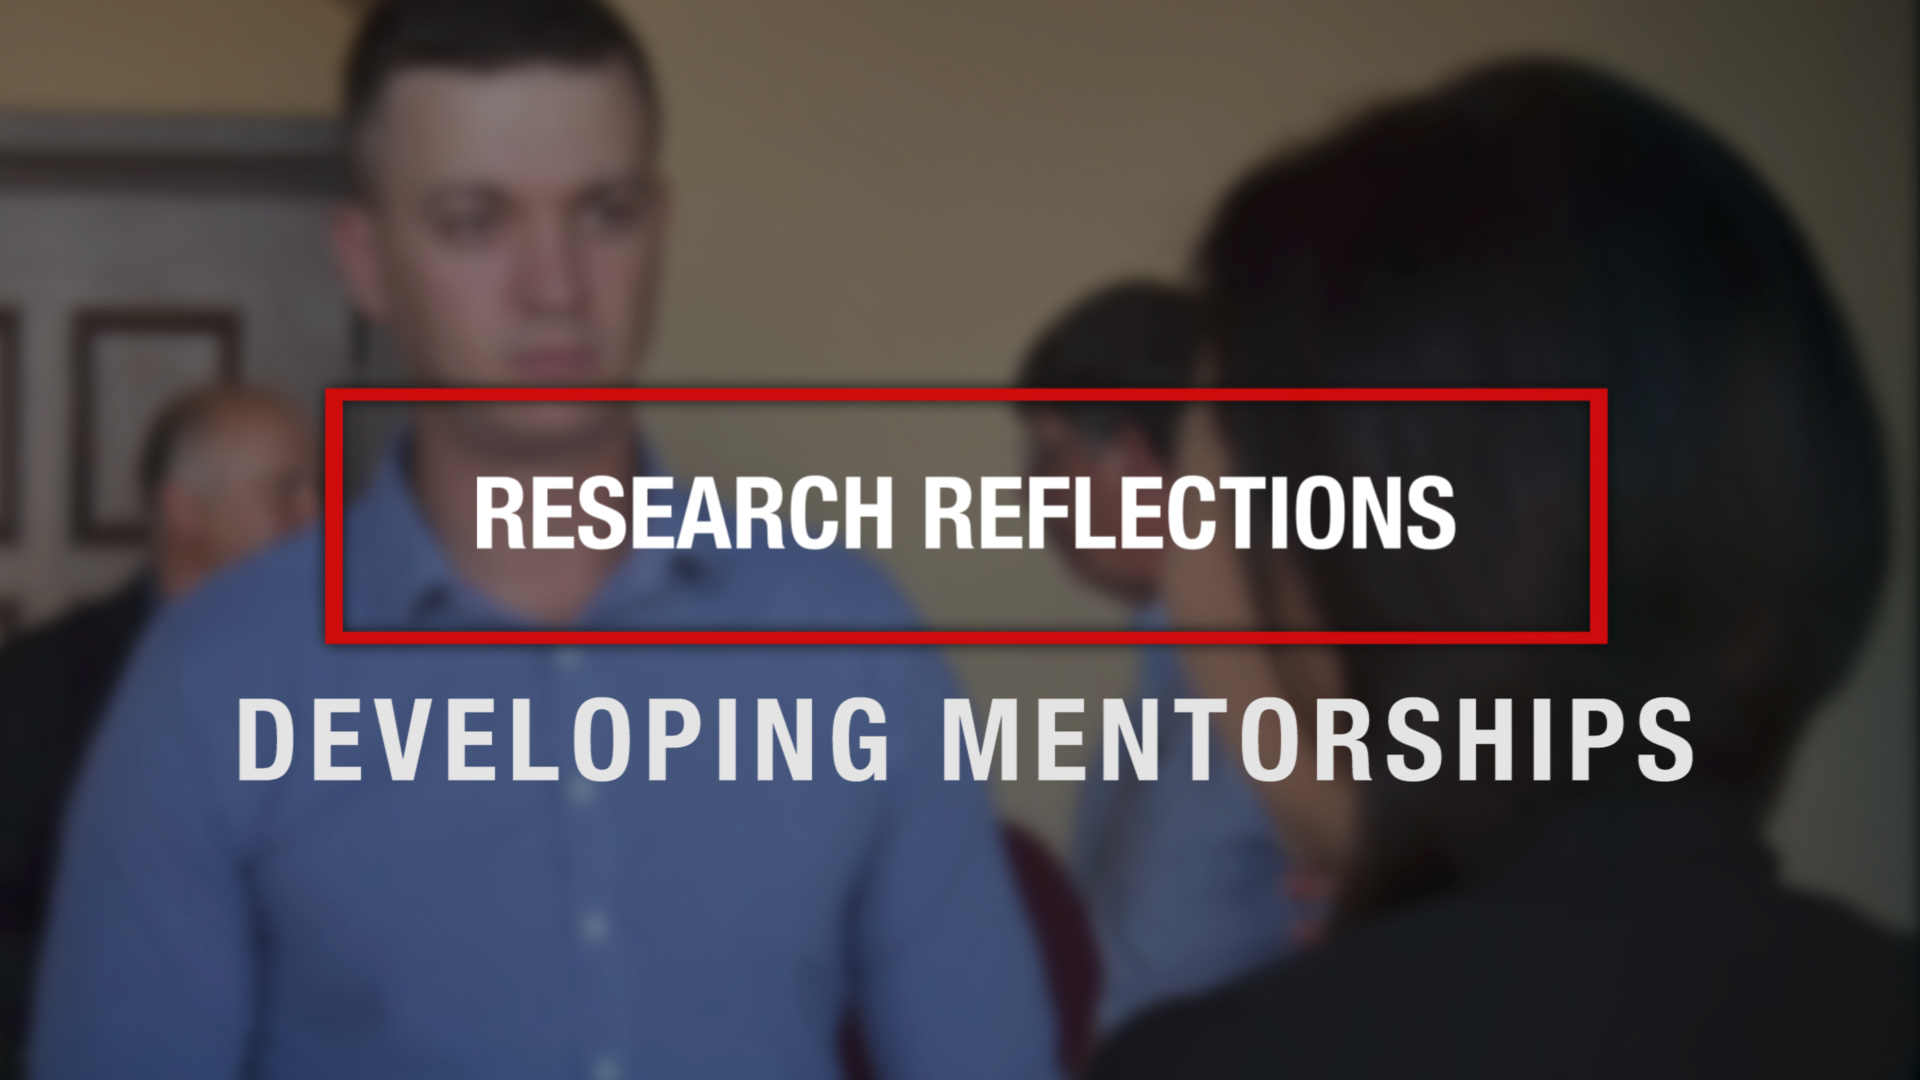 Text of "Research Reflections: Developing Mentorships" superimposed over an image of two researchers talking at a networking event.